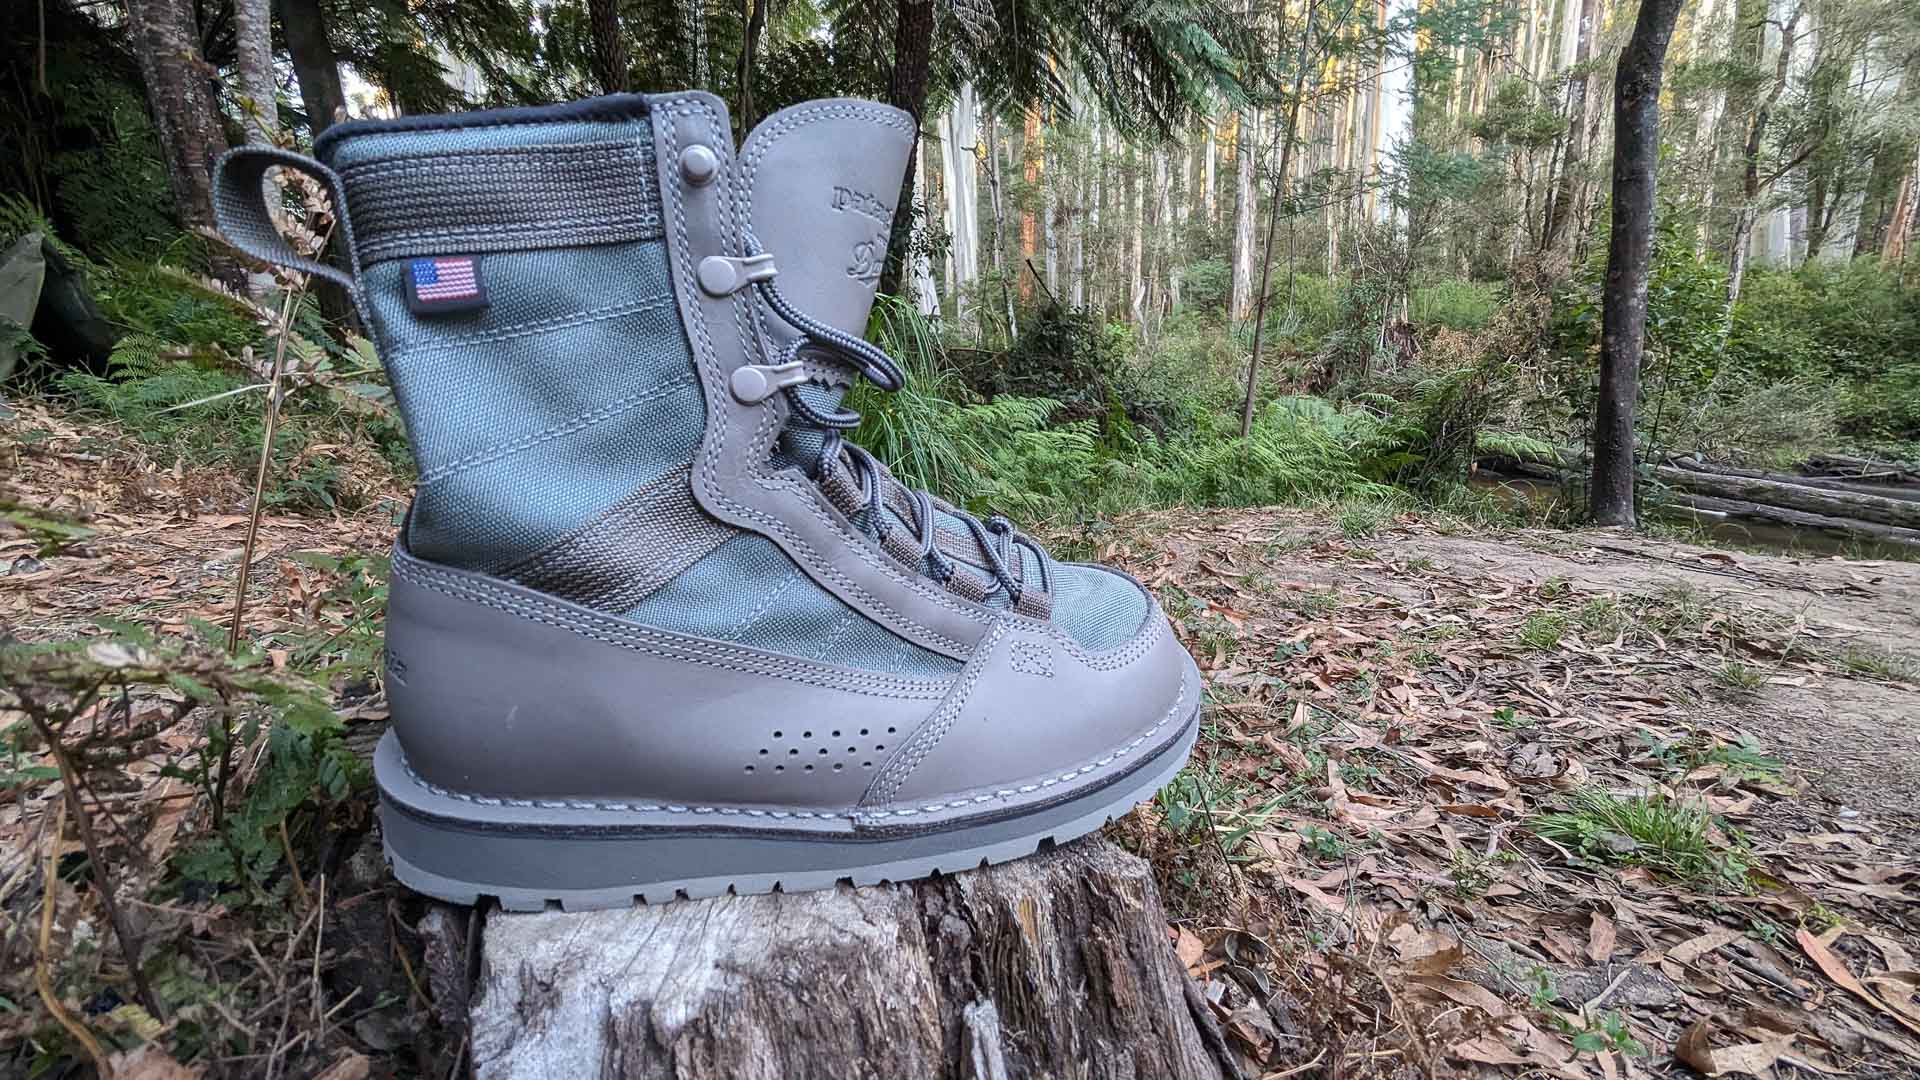 Patagonia x Danner Fly Fishing Boots